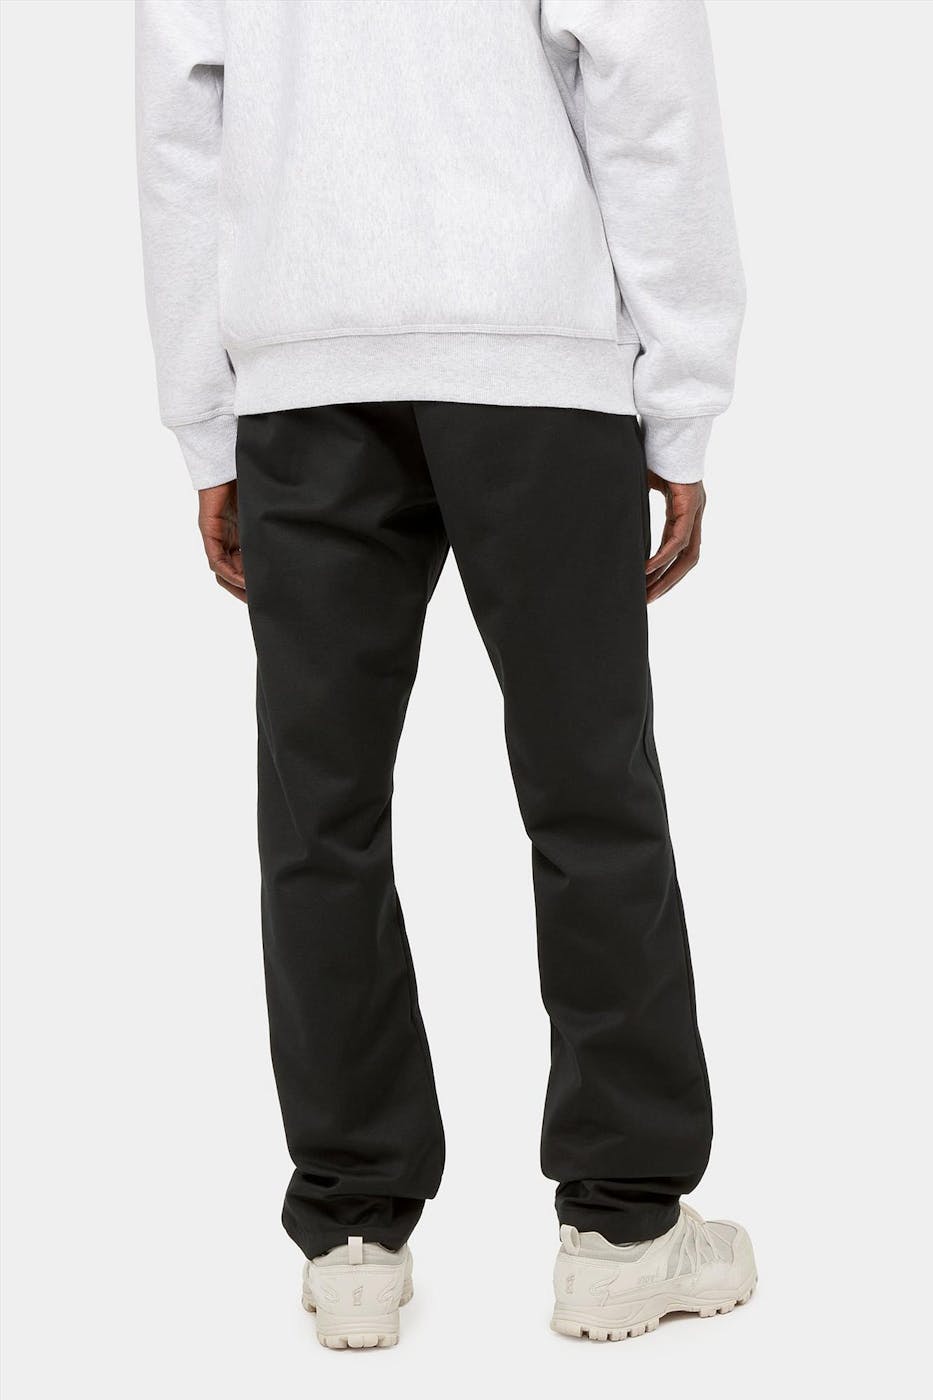 Carhartt WIP - Zwarte relaxed tapered Master Pant